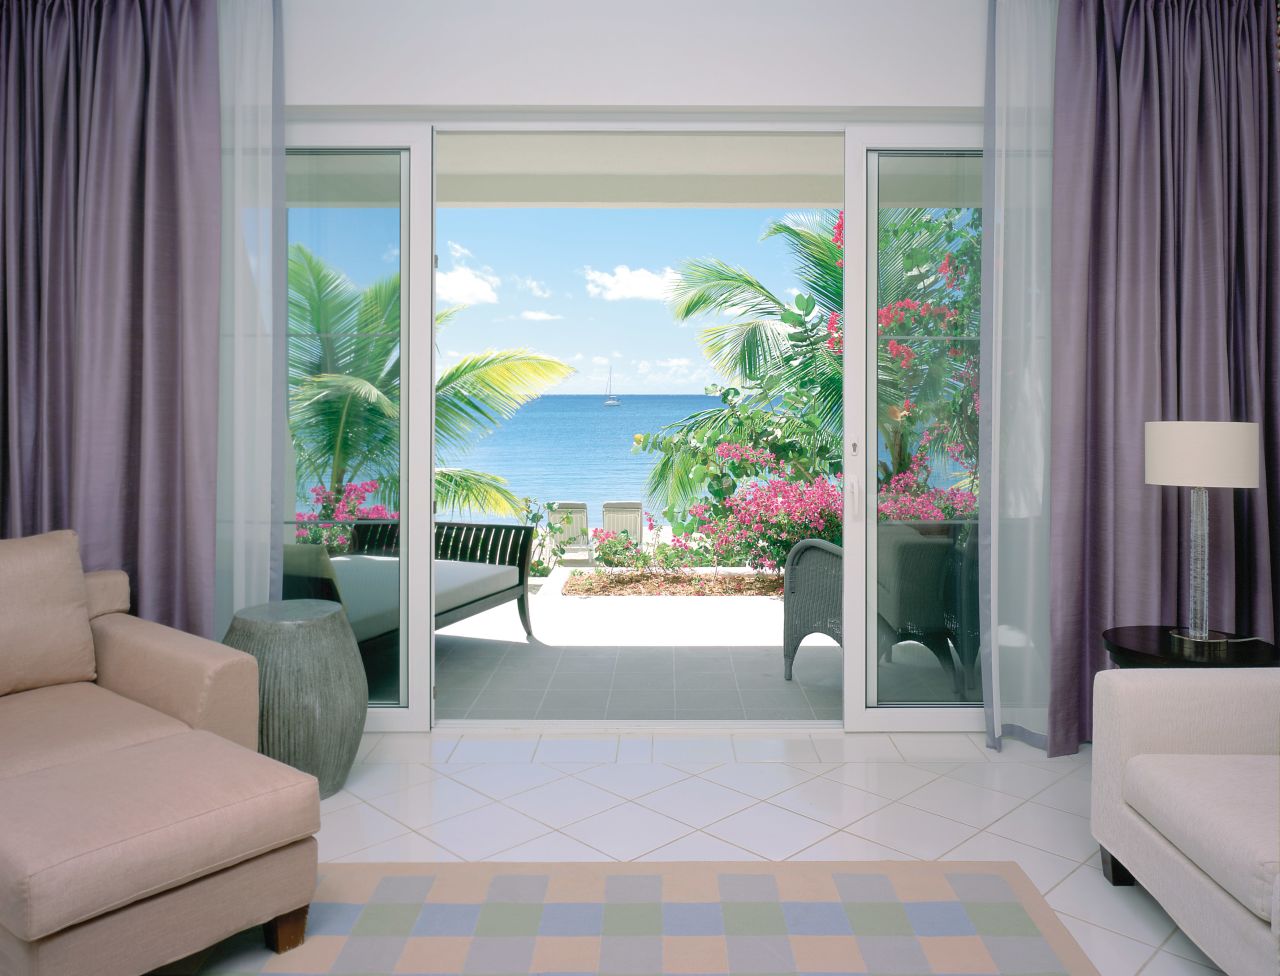 <strong>Carlisle Bay: </strong>All of its 82 suites face the water. Each comes outfitted with a day bed on its balcony or terrace for maximum waterfront relaxation.